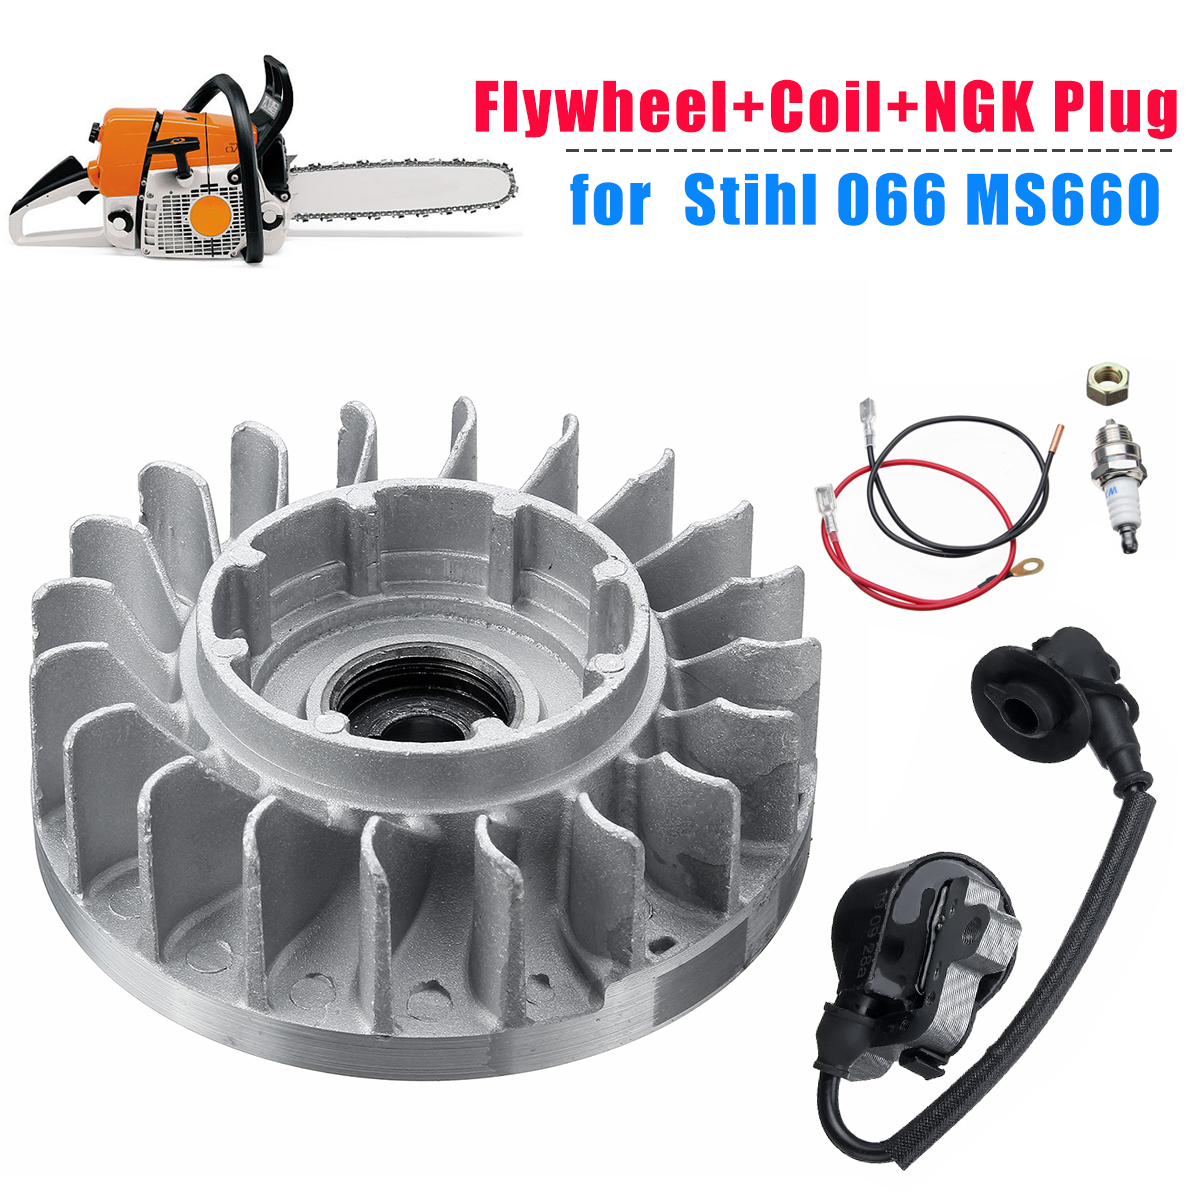 OEM-11224001217-Replacement-Flywheel-Coil-NGK-Plug-for-Stihl-Electric-Chainsaw-066-MS660-1631889-1